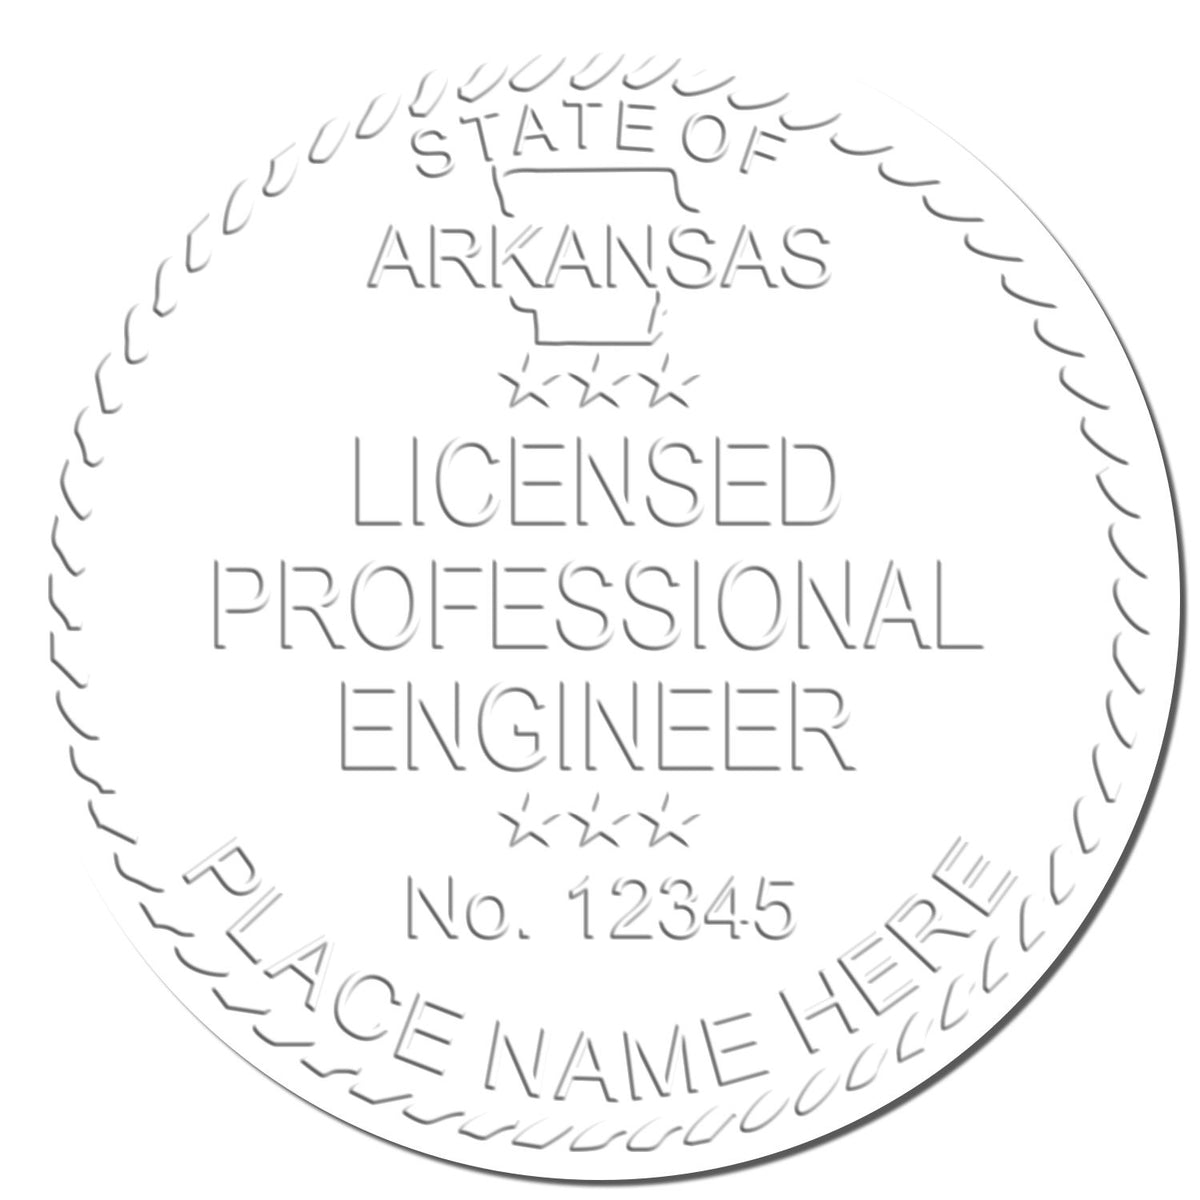 Another Example of a stamped impression of the Arkansas Engineer Desk Seal on a piece of office paper.